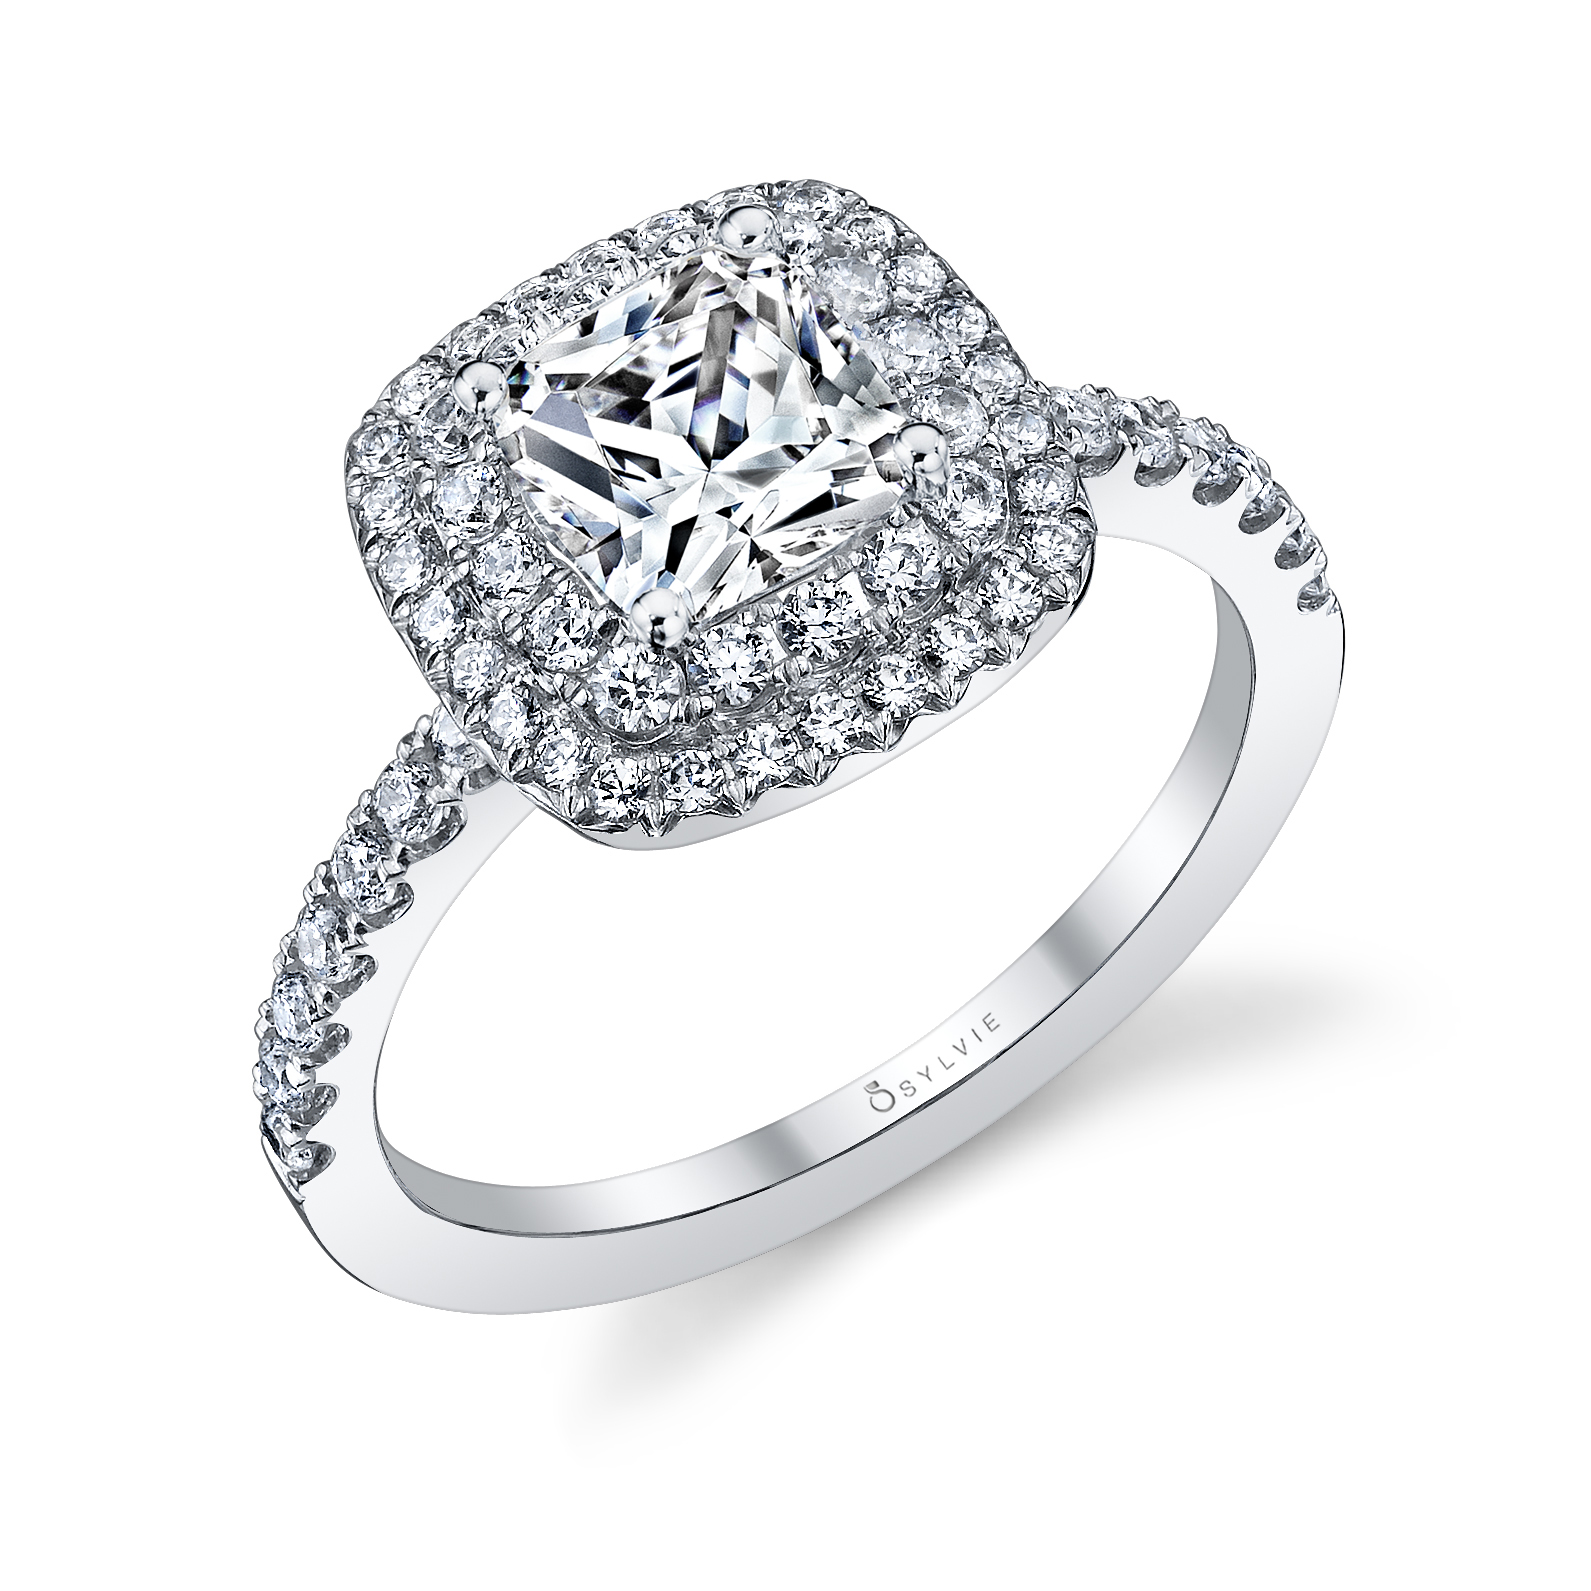 Claudia - Cushion Cut Engagement Ring with Double Halo